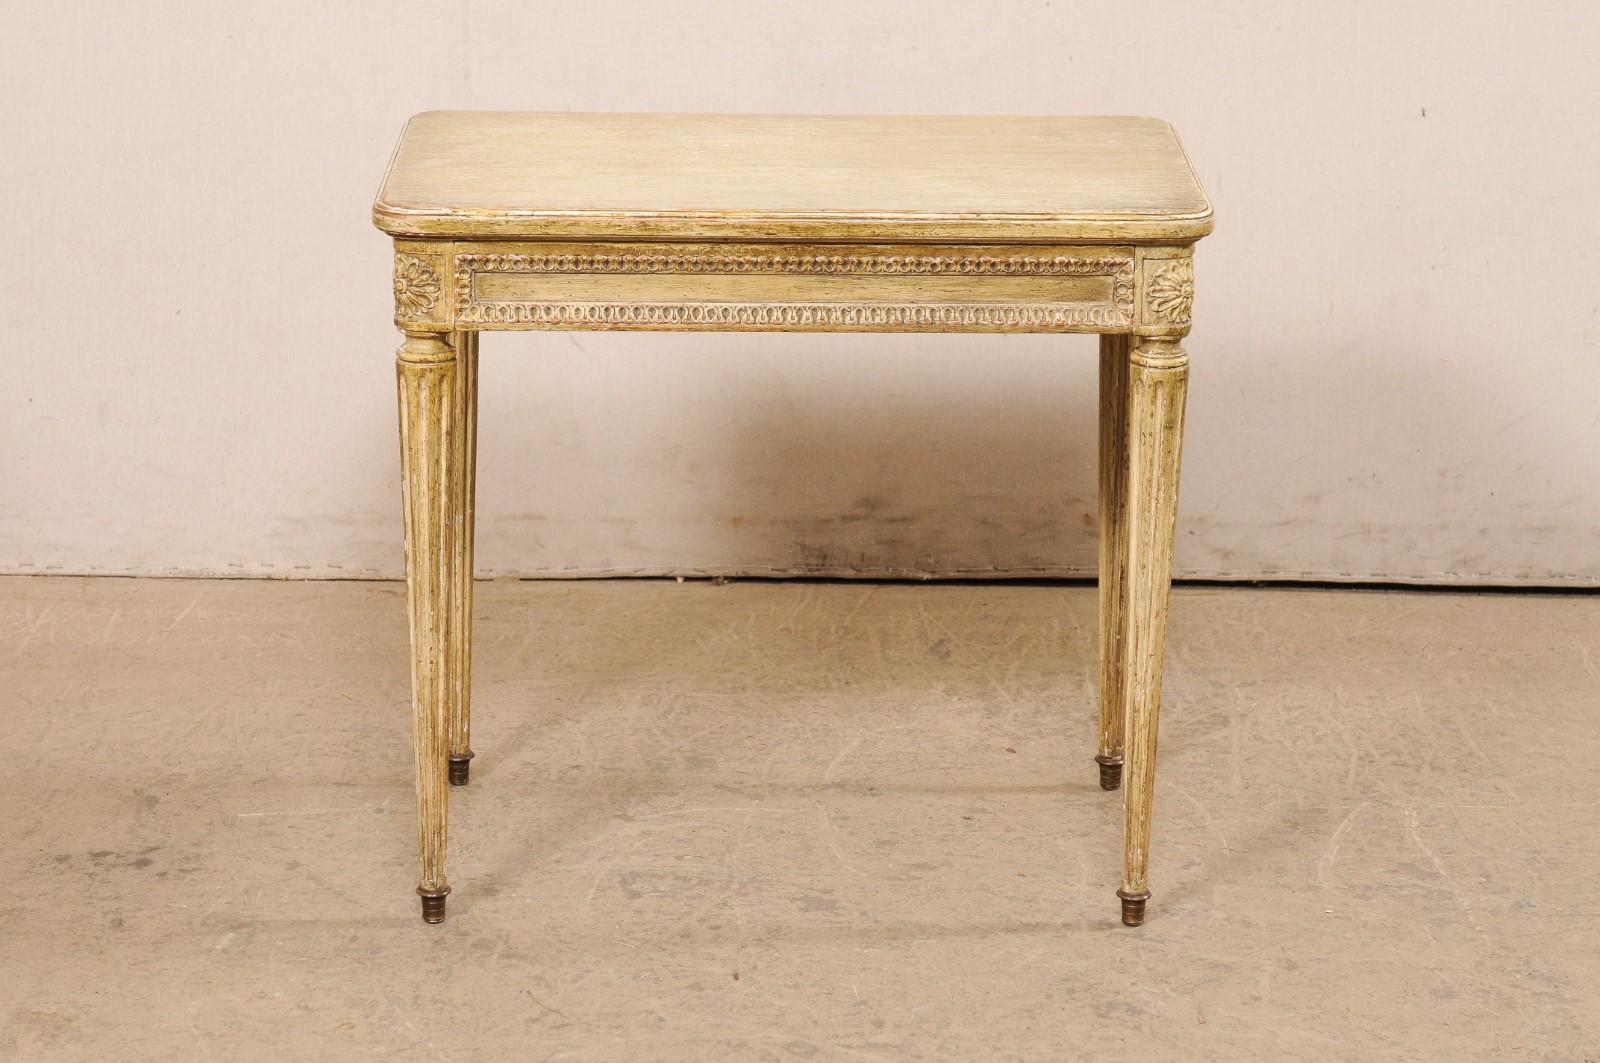 Louis XVI Style French Side Table with its Original Painted Finish Early 20th C. For Sale 7